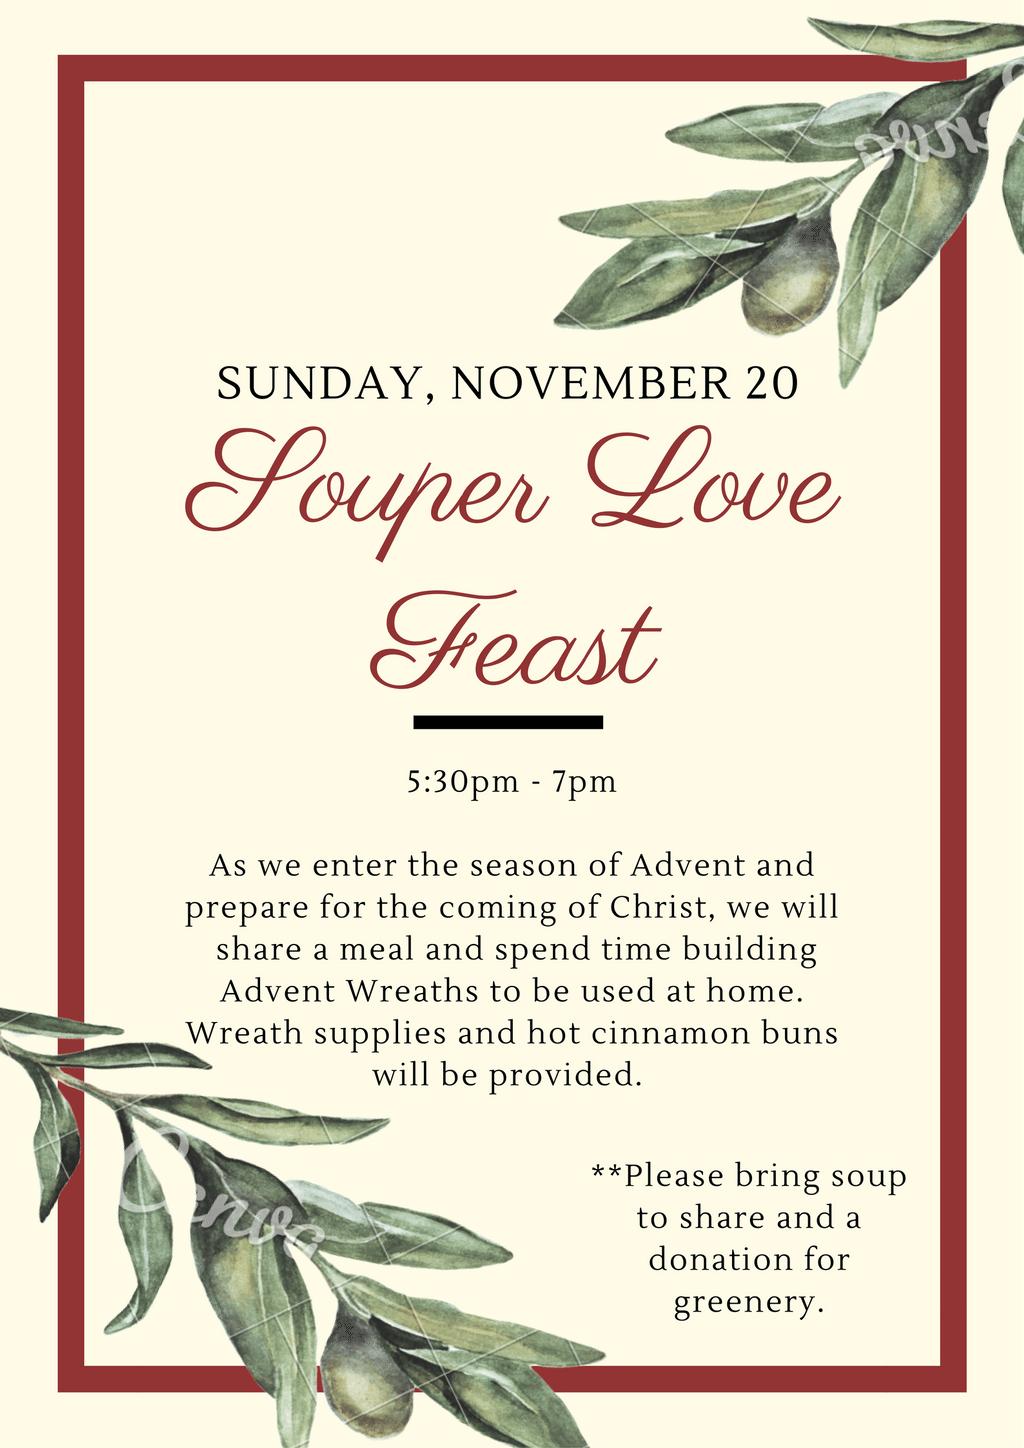 Poinsettias for the Advent Season You are invited to help celebrate Advent by providing poinsettias to adorn the sanctuary during the Advent season. The cost is $9.